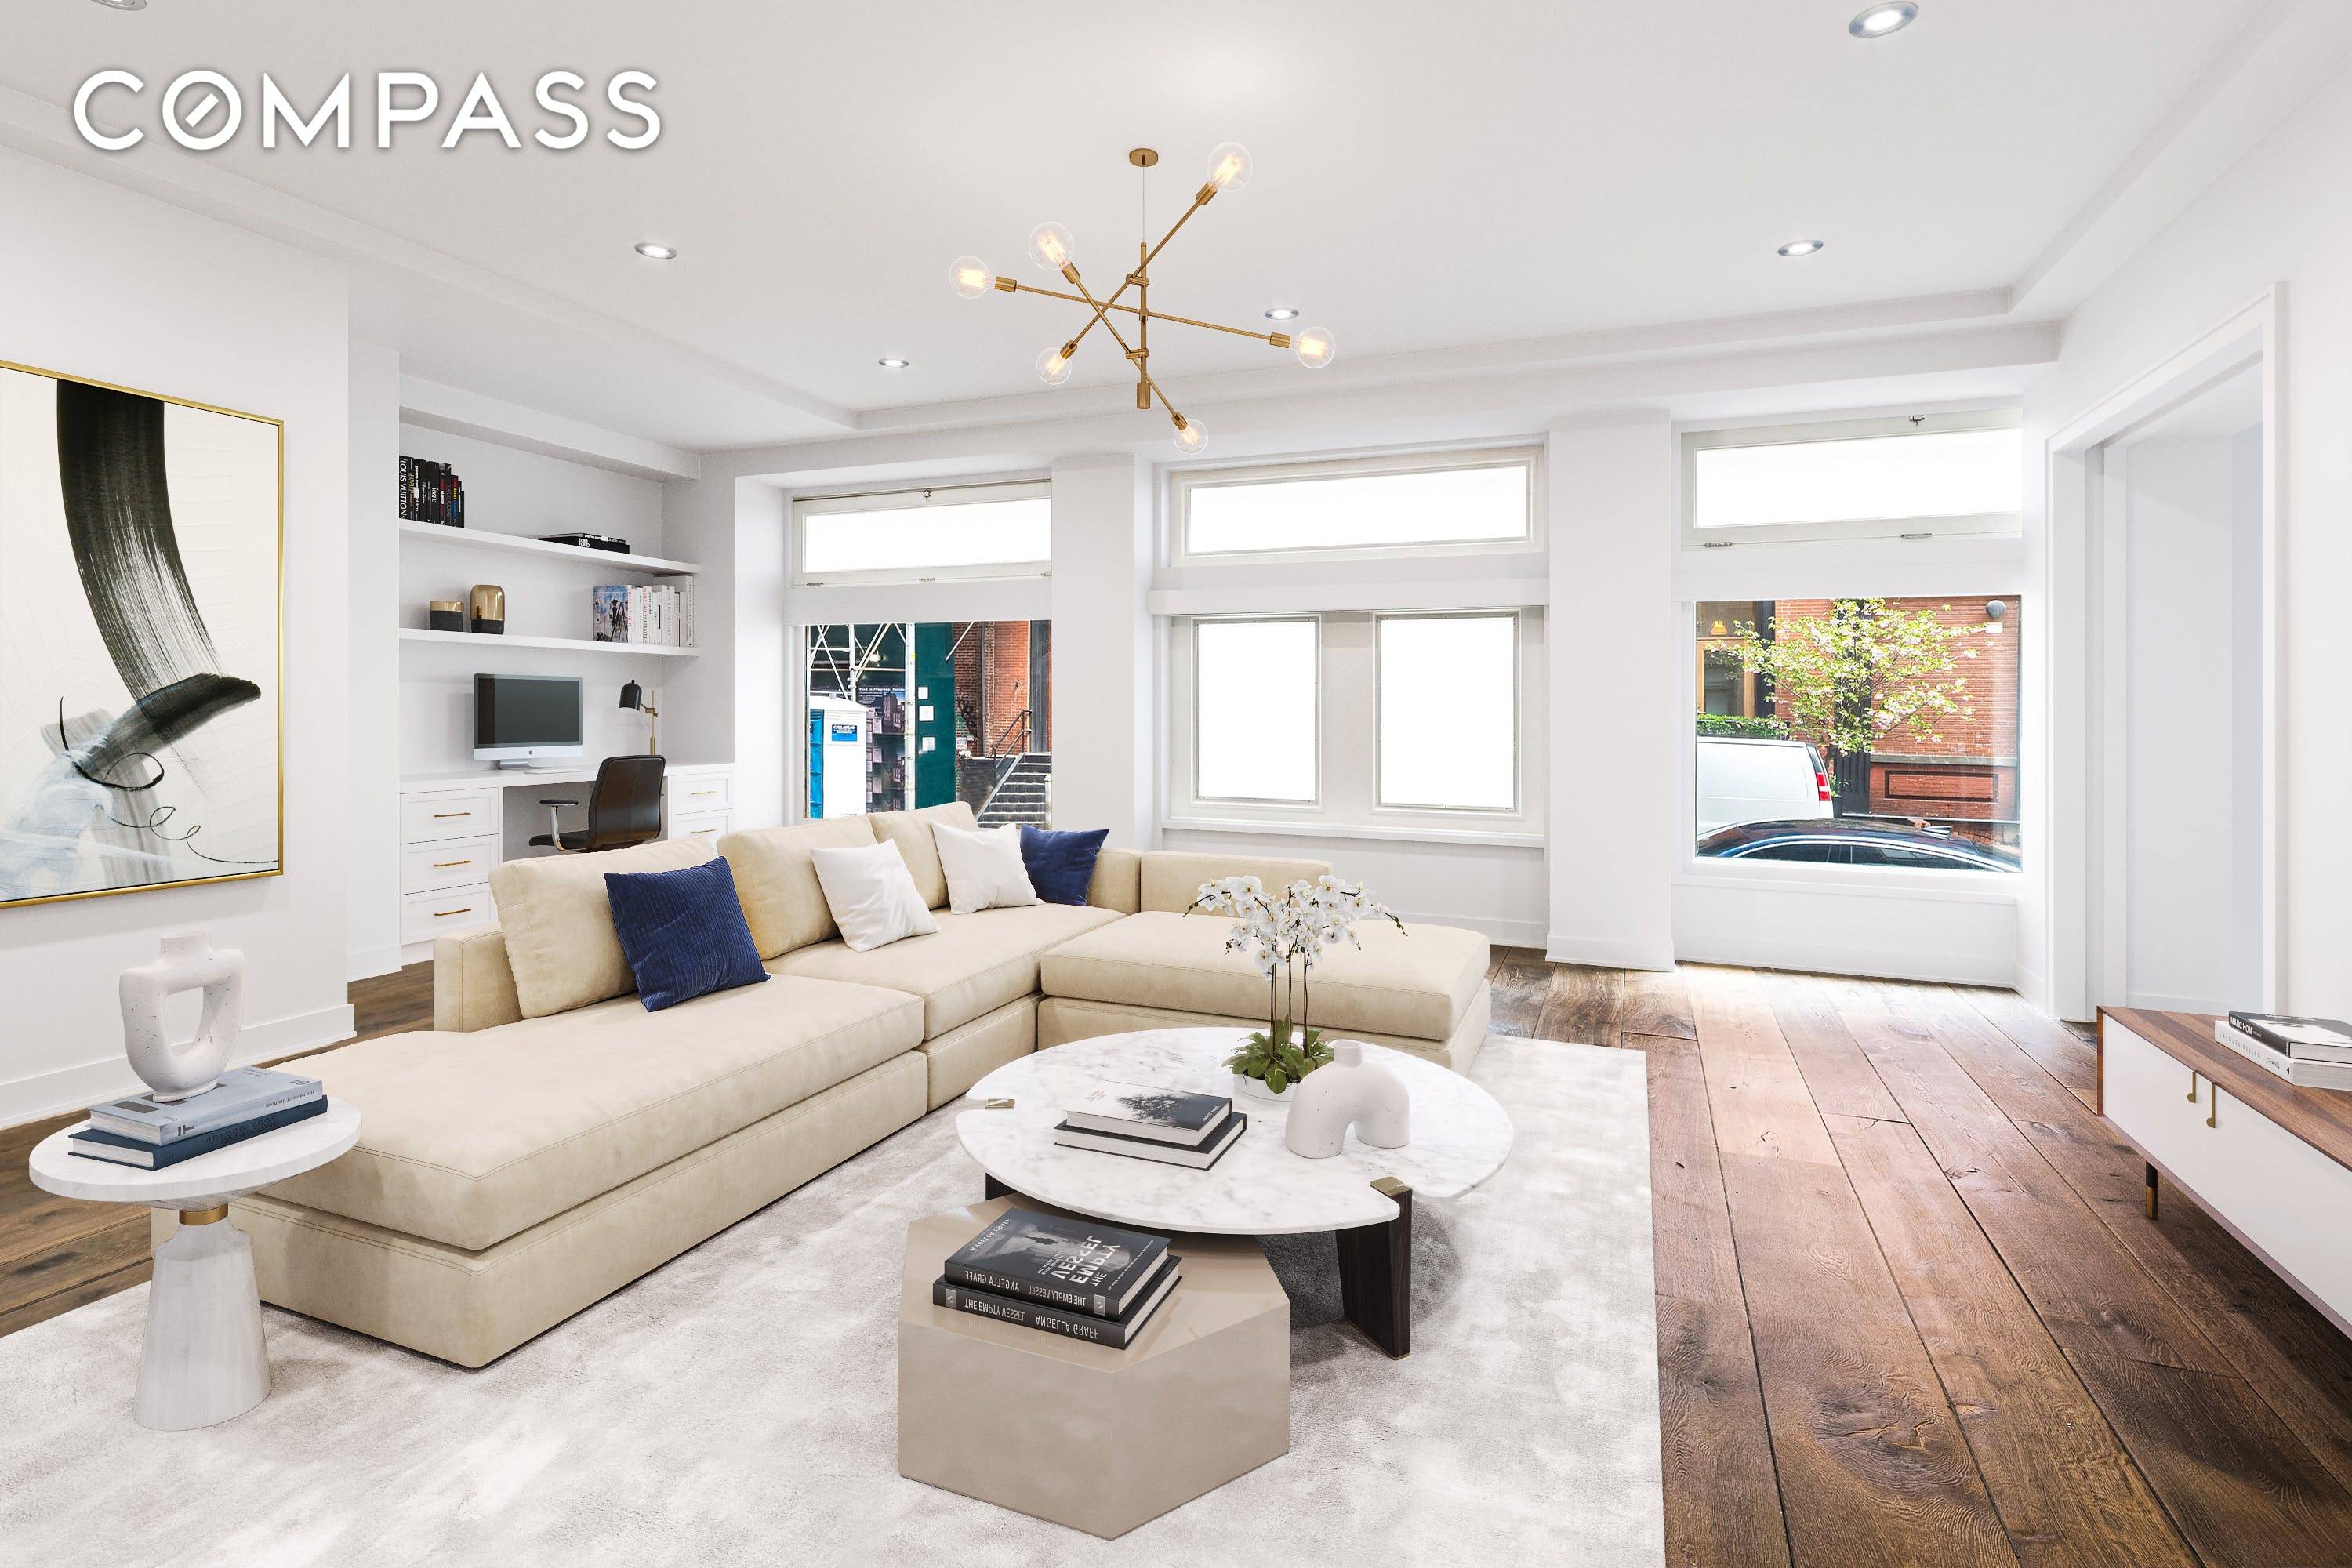 Beautifully renovated Three Bedroom home office loft duplex residence offering grand open loft living with amazing division of space on one of the quietest, most coveted cobblestone blocks in TriBeCa.